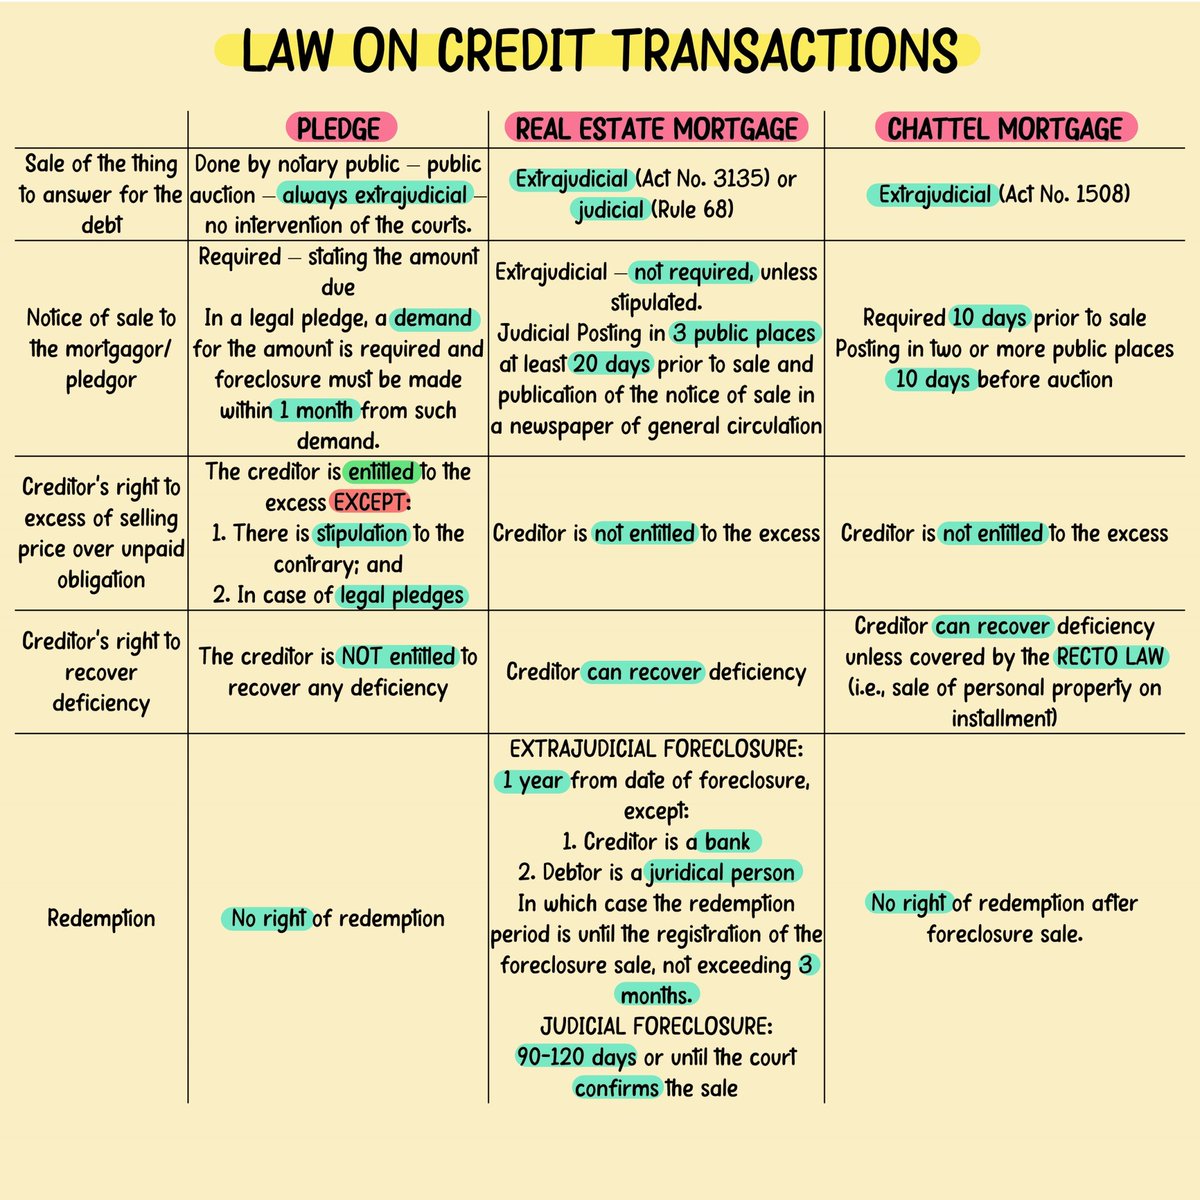 RFBT Notes: Law on Credit Transactions